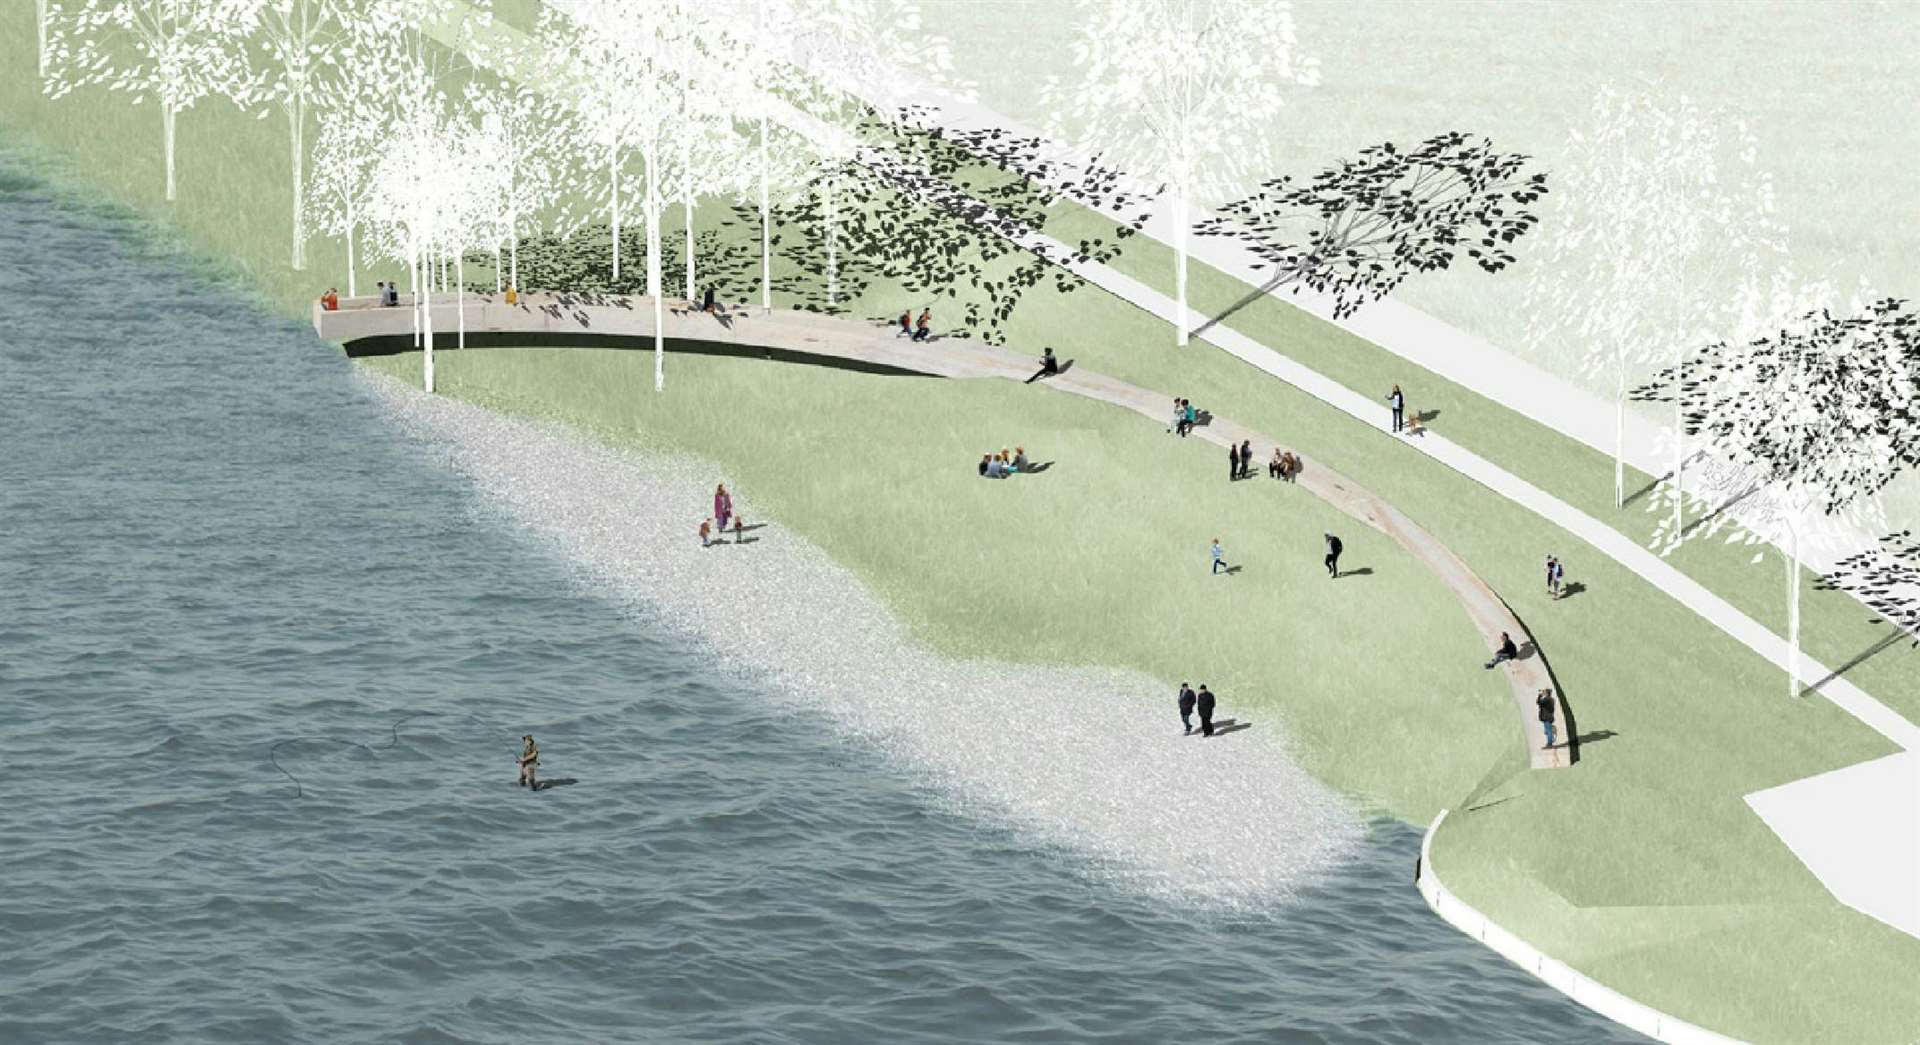 An artist's impression of what the artwork could look like – although it has since been redesigned.